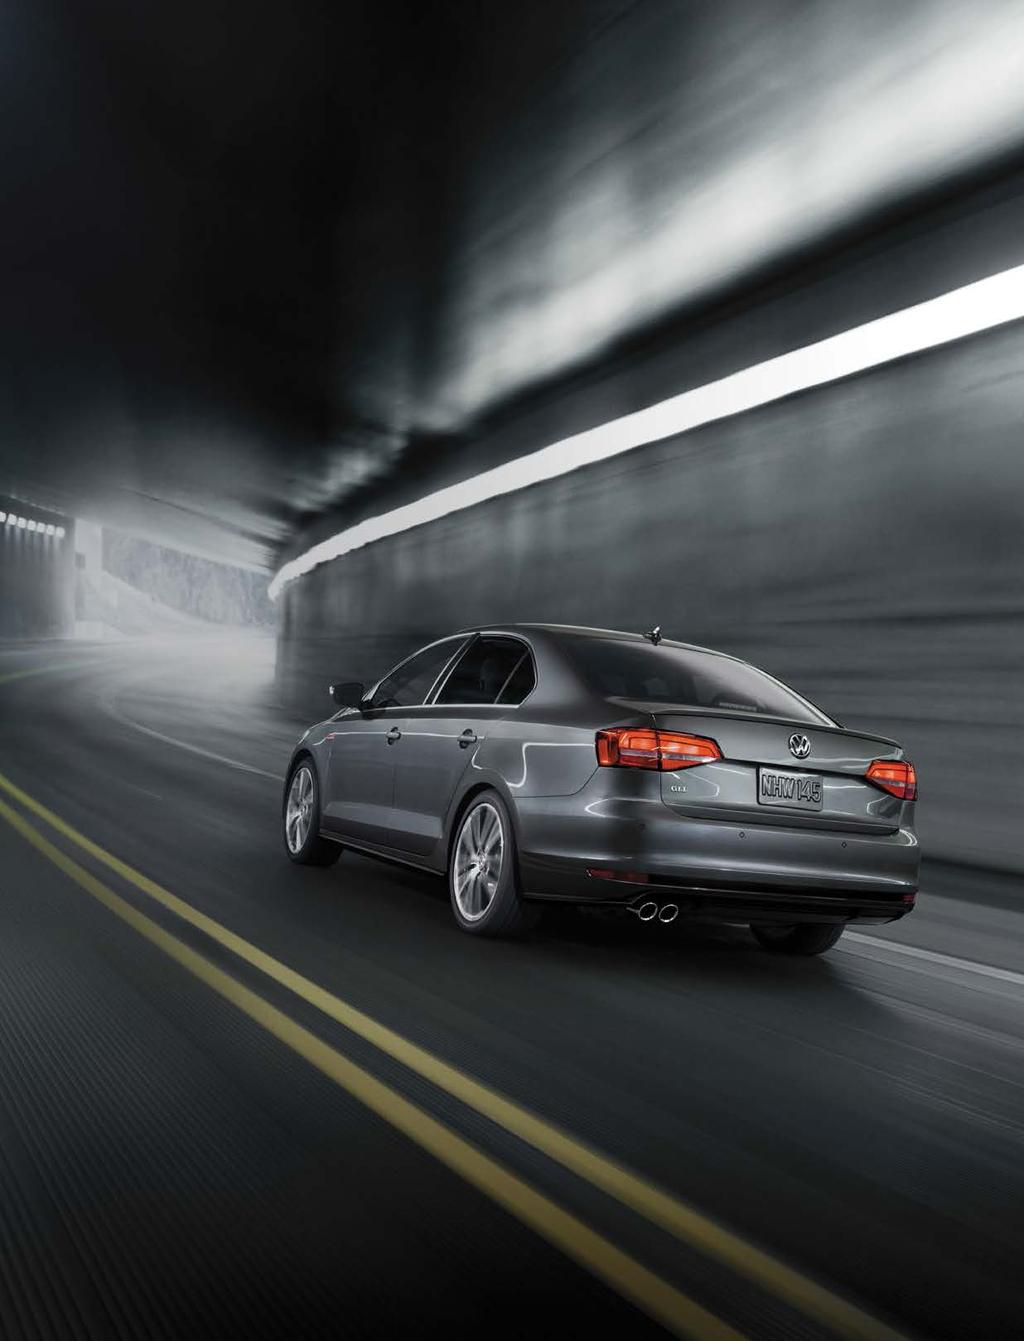 Redefining rush hour. Sports-car power and precision handling the 2016 Jetta GLI is anything but your ordinary ride.